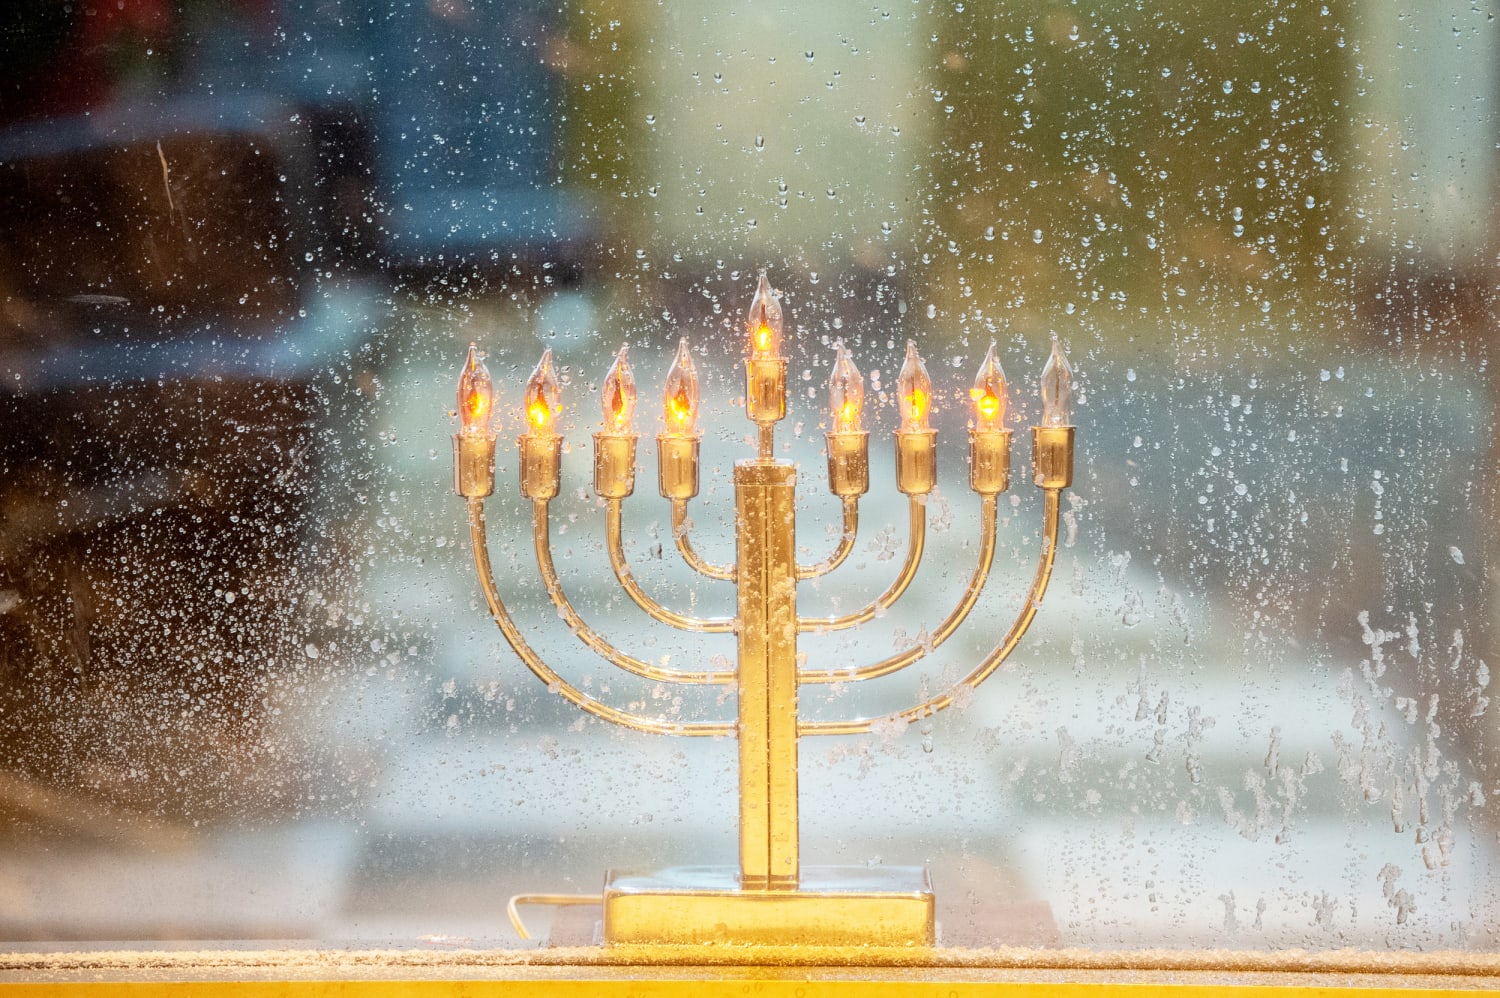 Dear corporations, Hanukkah is not the same as Passover